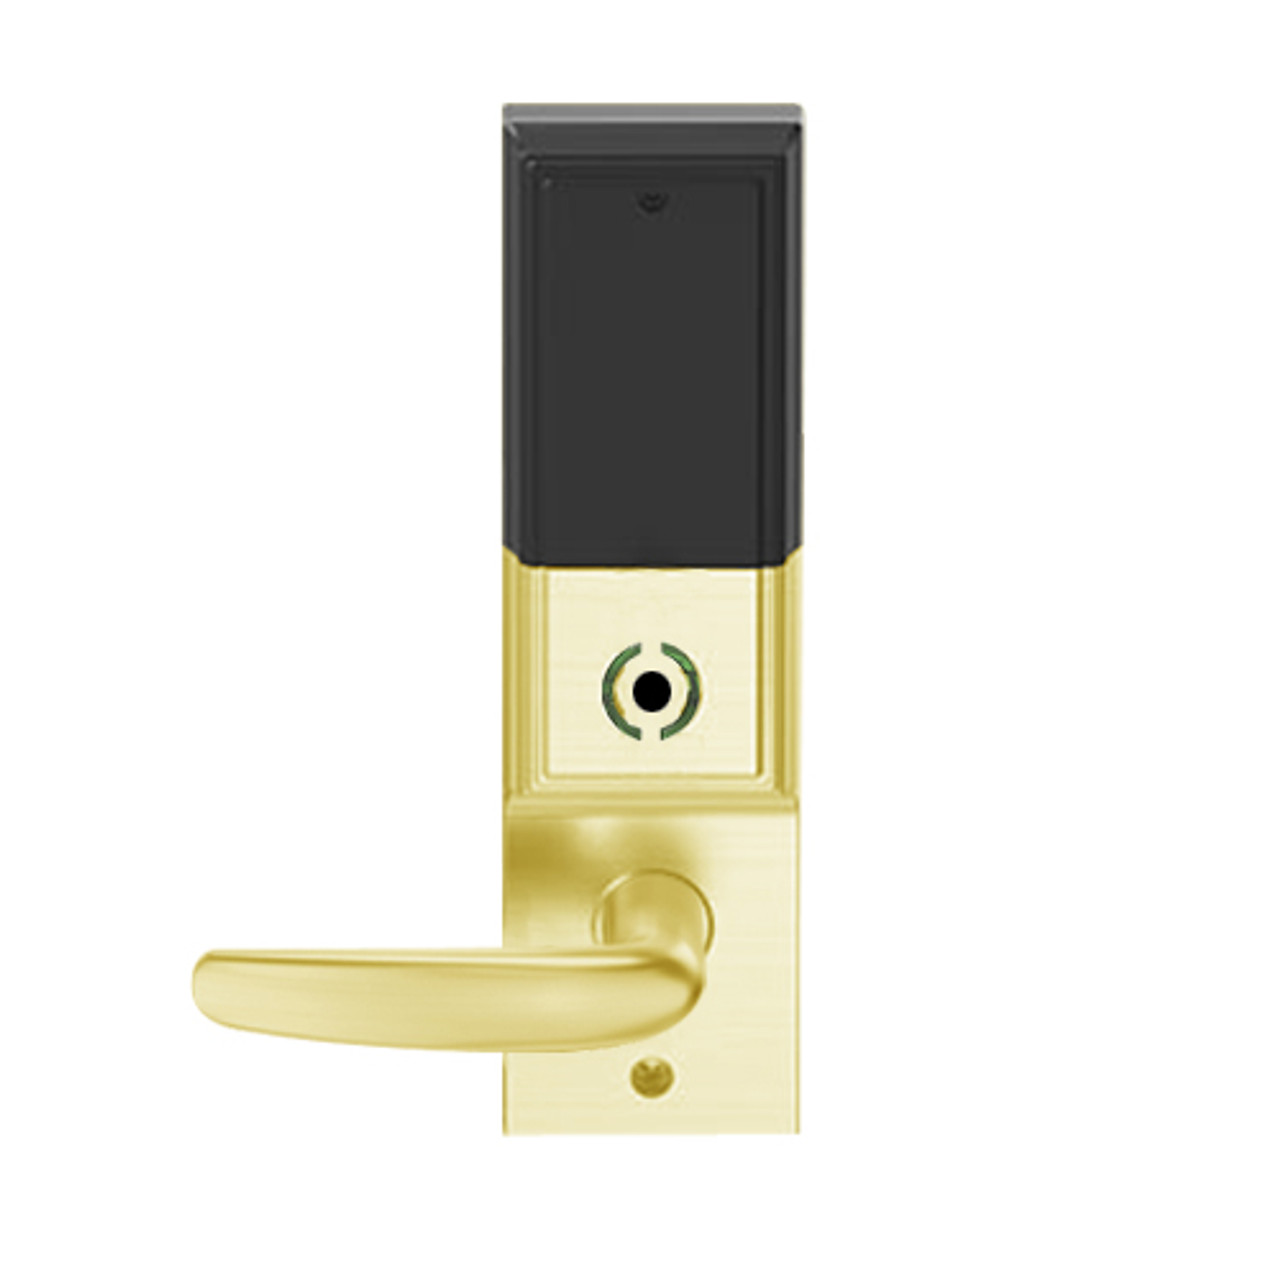 LEMB-ADD-BD-07-605 Schlage Privacy/Office Wireless Addison Mortise Lock with Push Button, LED and Athens Lever Prepped for SFIC in Bright Brass